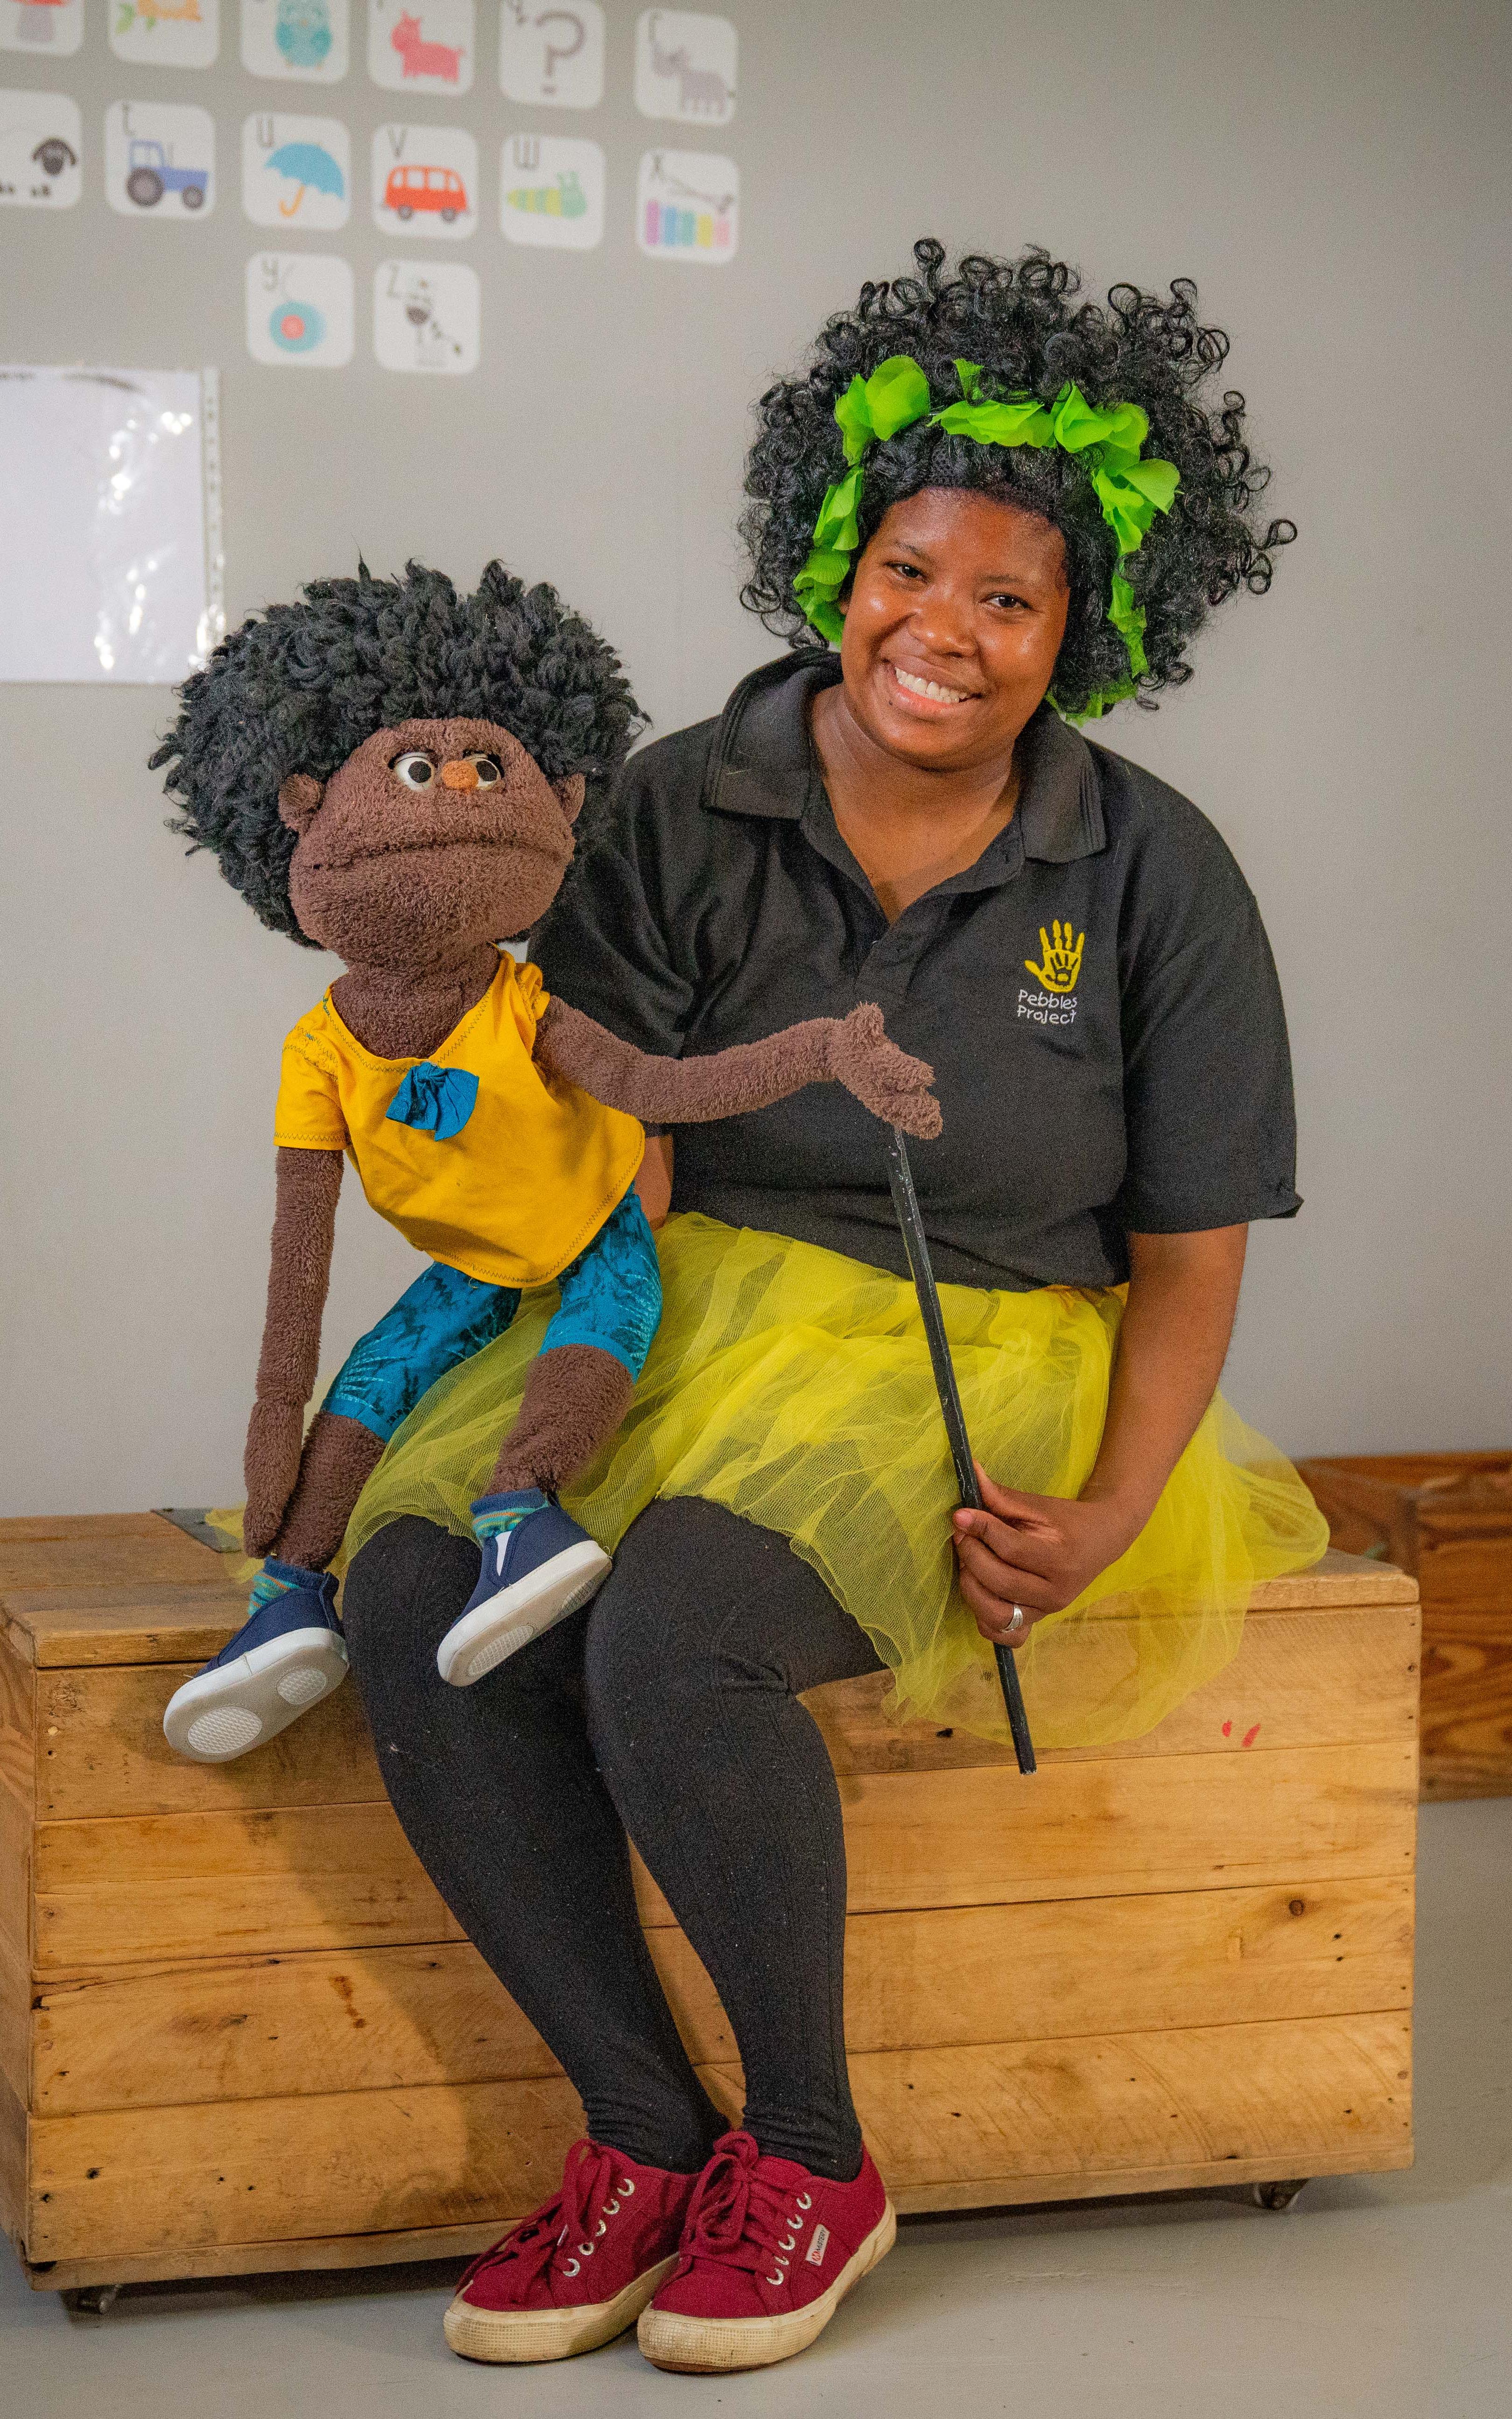 Puppeteering to inspire kids